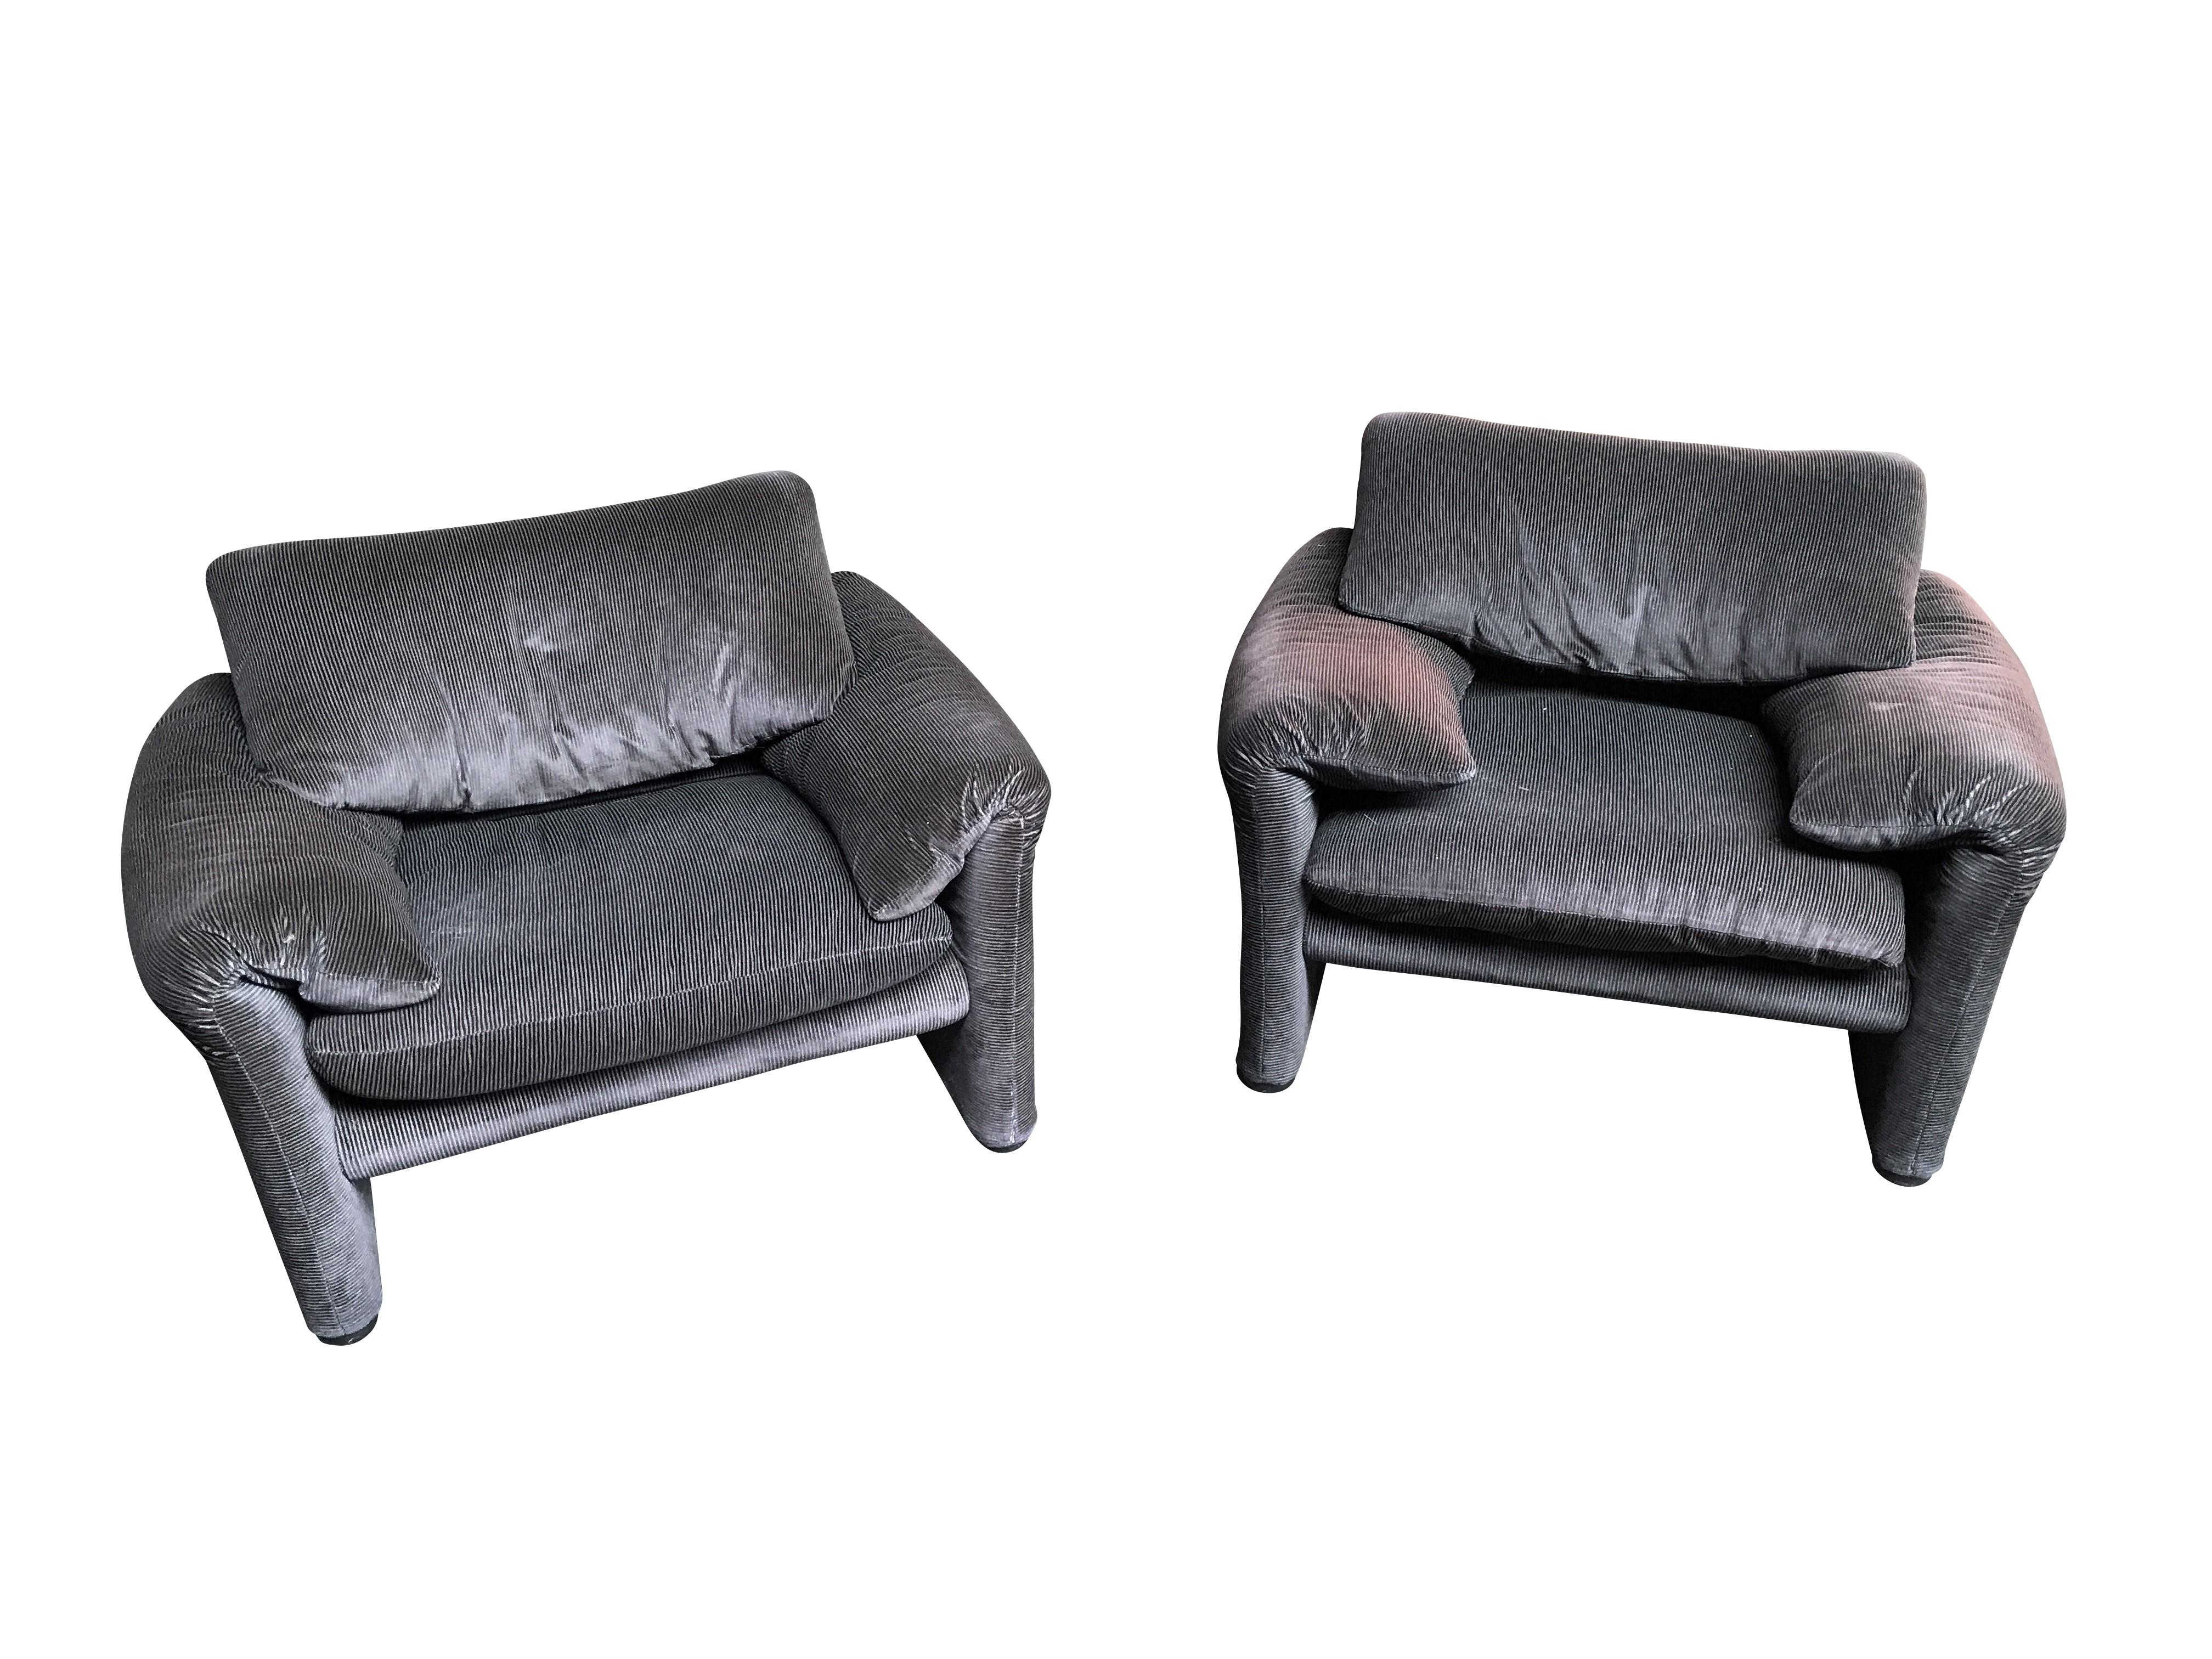 Vintage maralunga armchairs designed by Vico Magistretti for Cassina in 1973.

These iconic design sofa's are upholstered in a grey-striped fabric and.

The backrests are adjustable.

Some user traces but still in good condition. One chair has